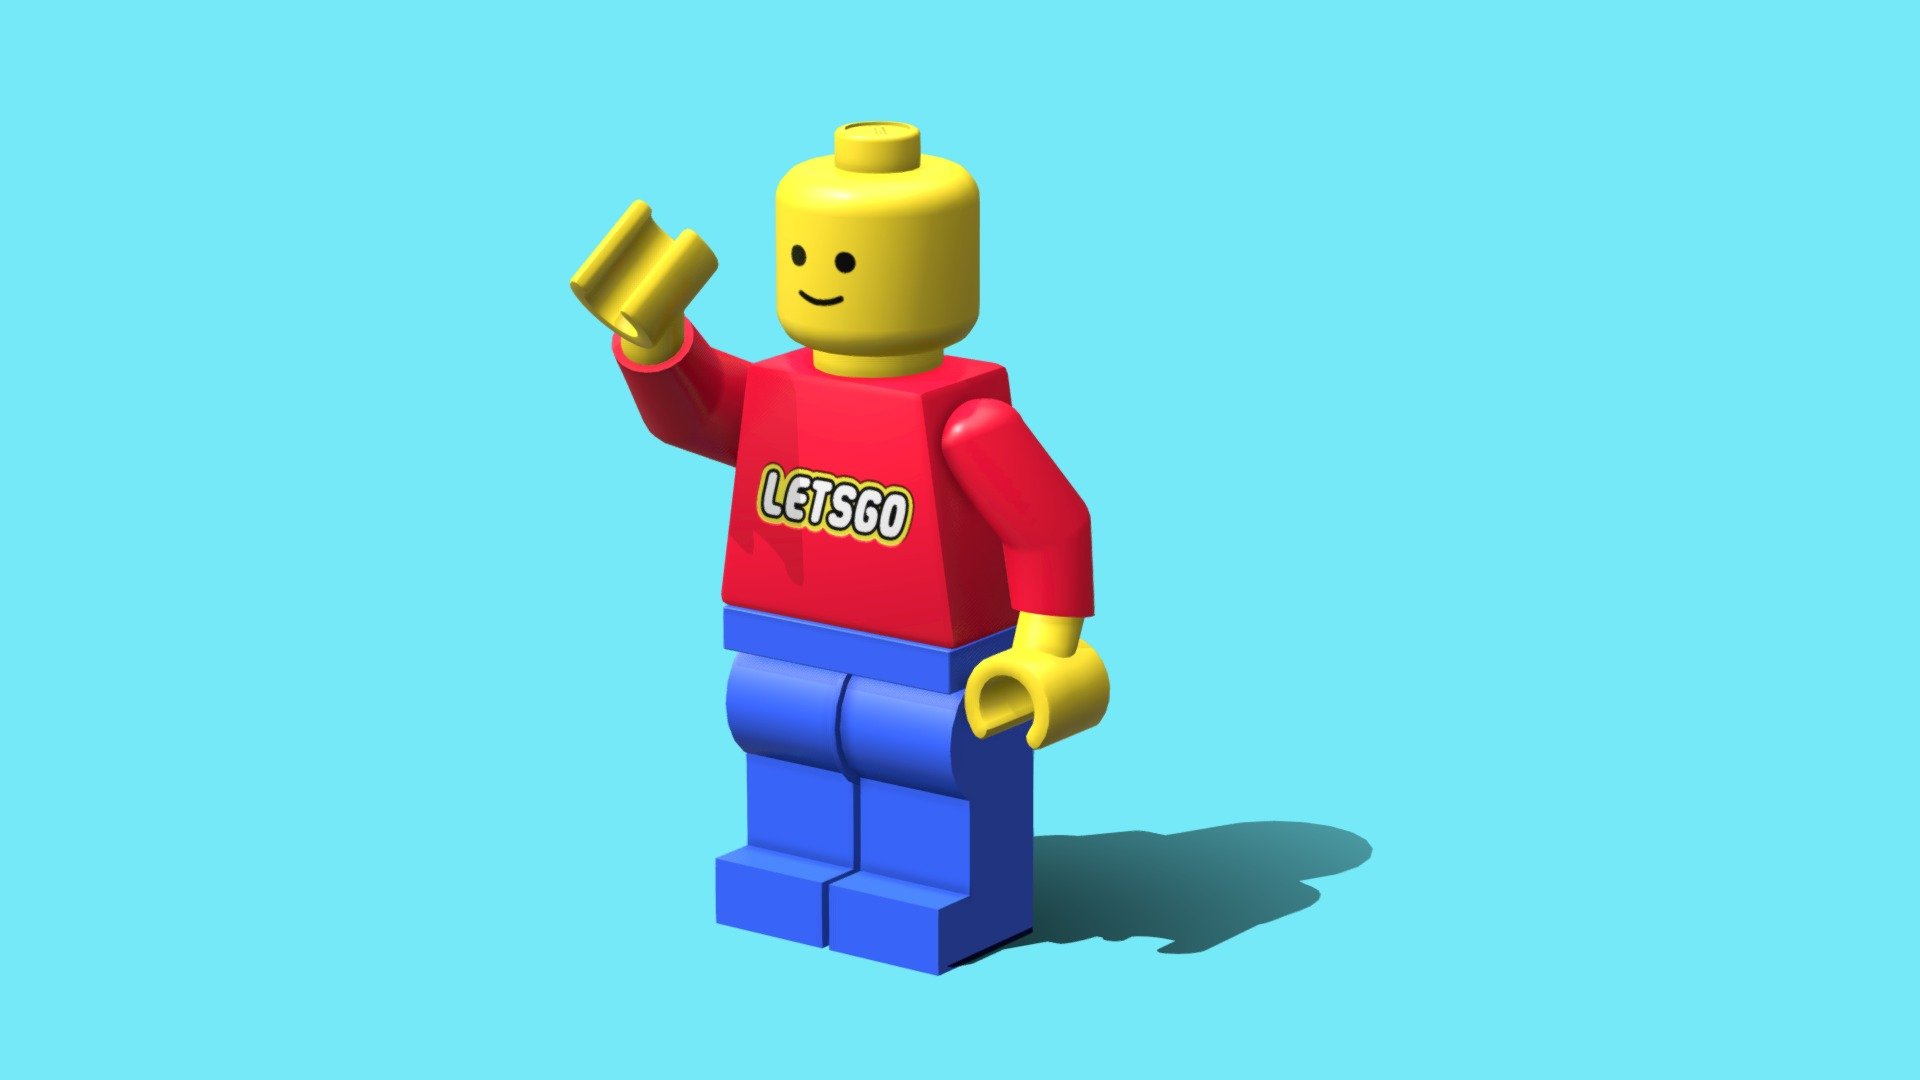 Lego Army Soldier 3D model